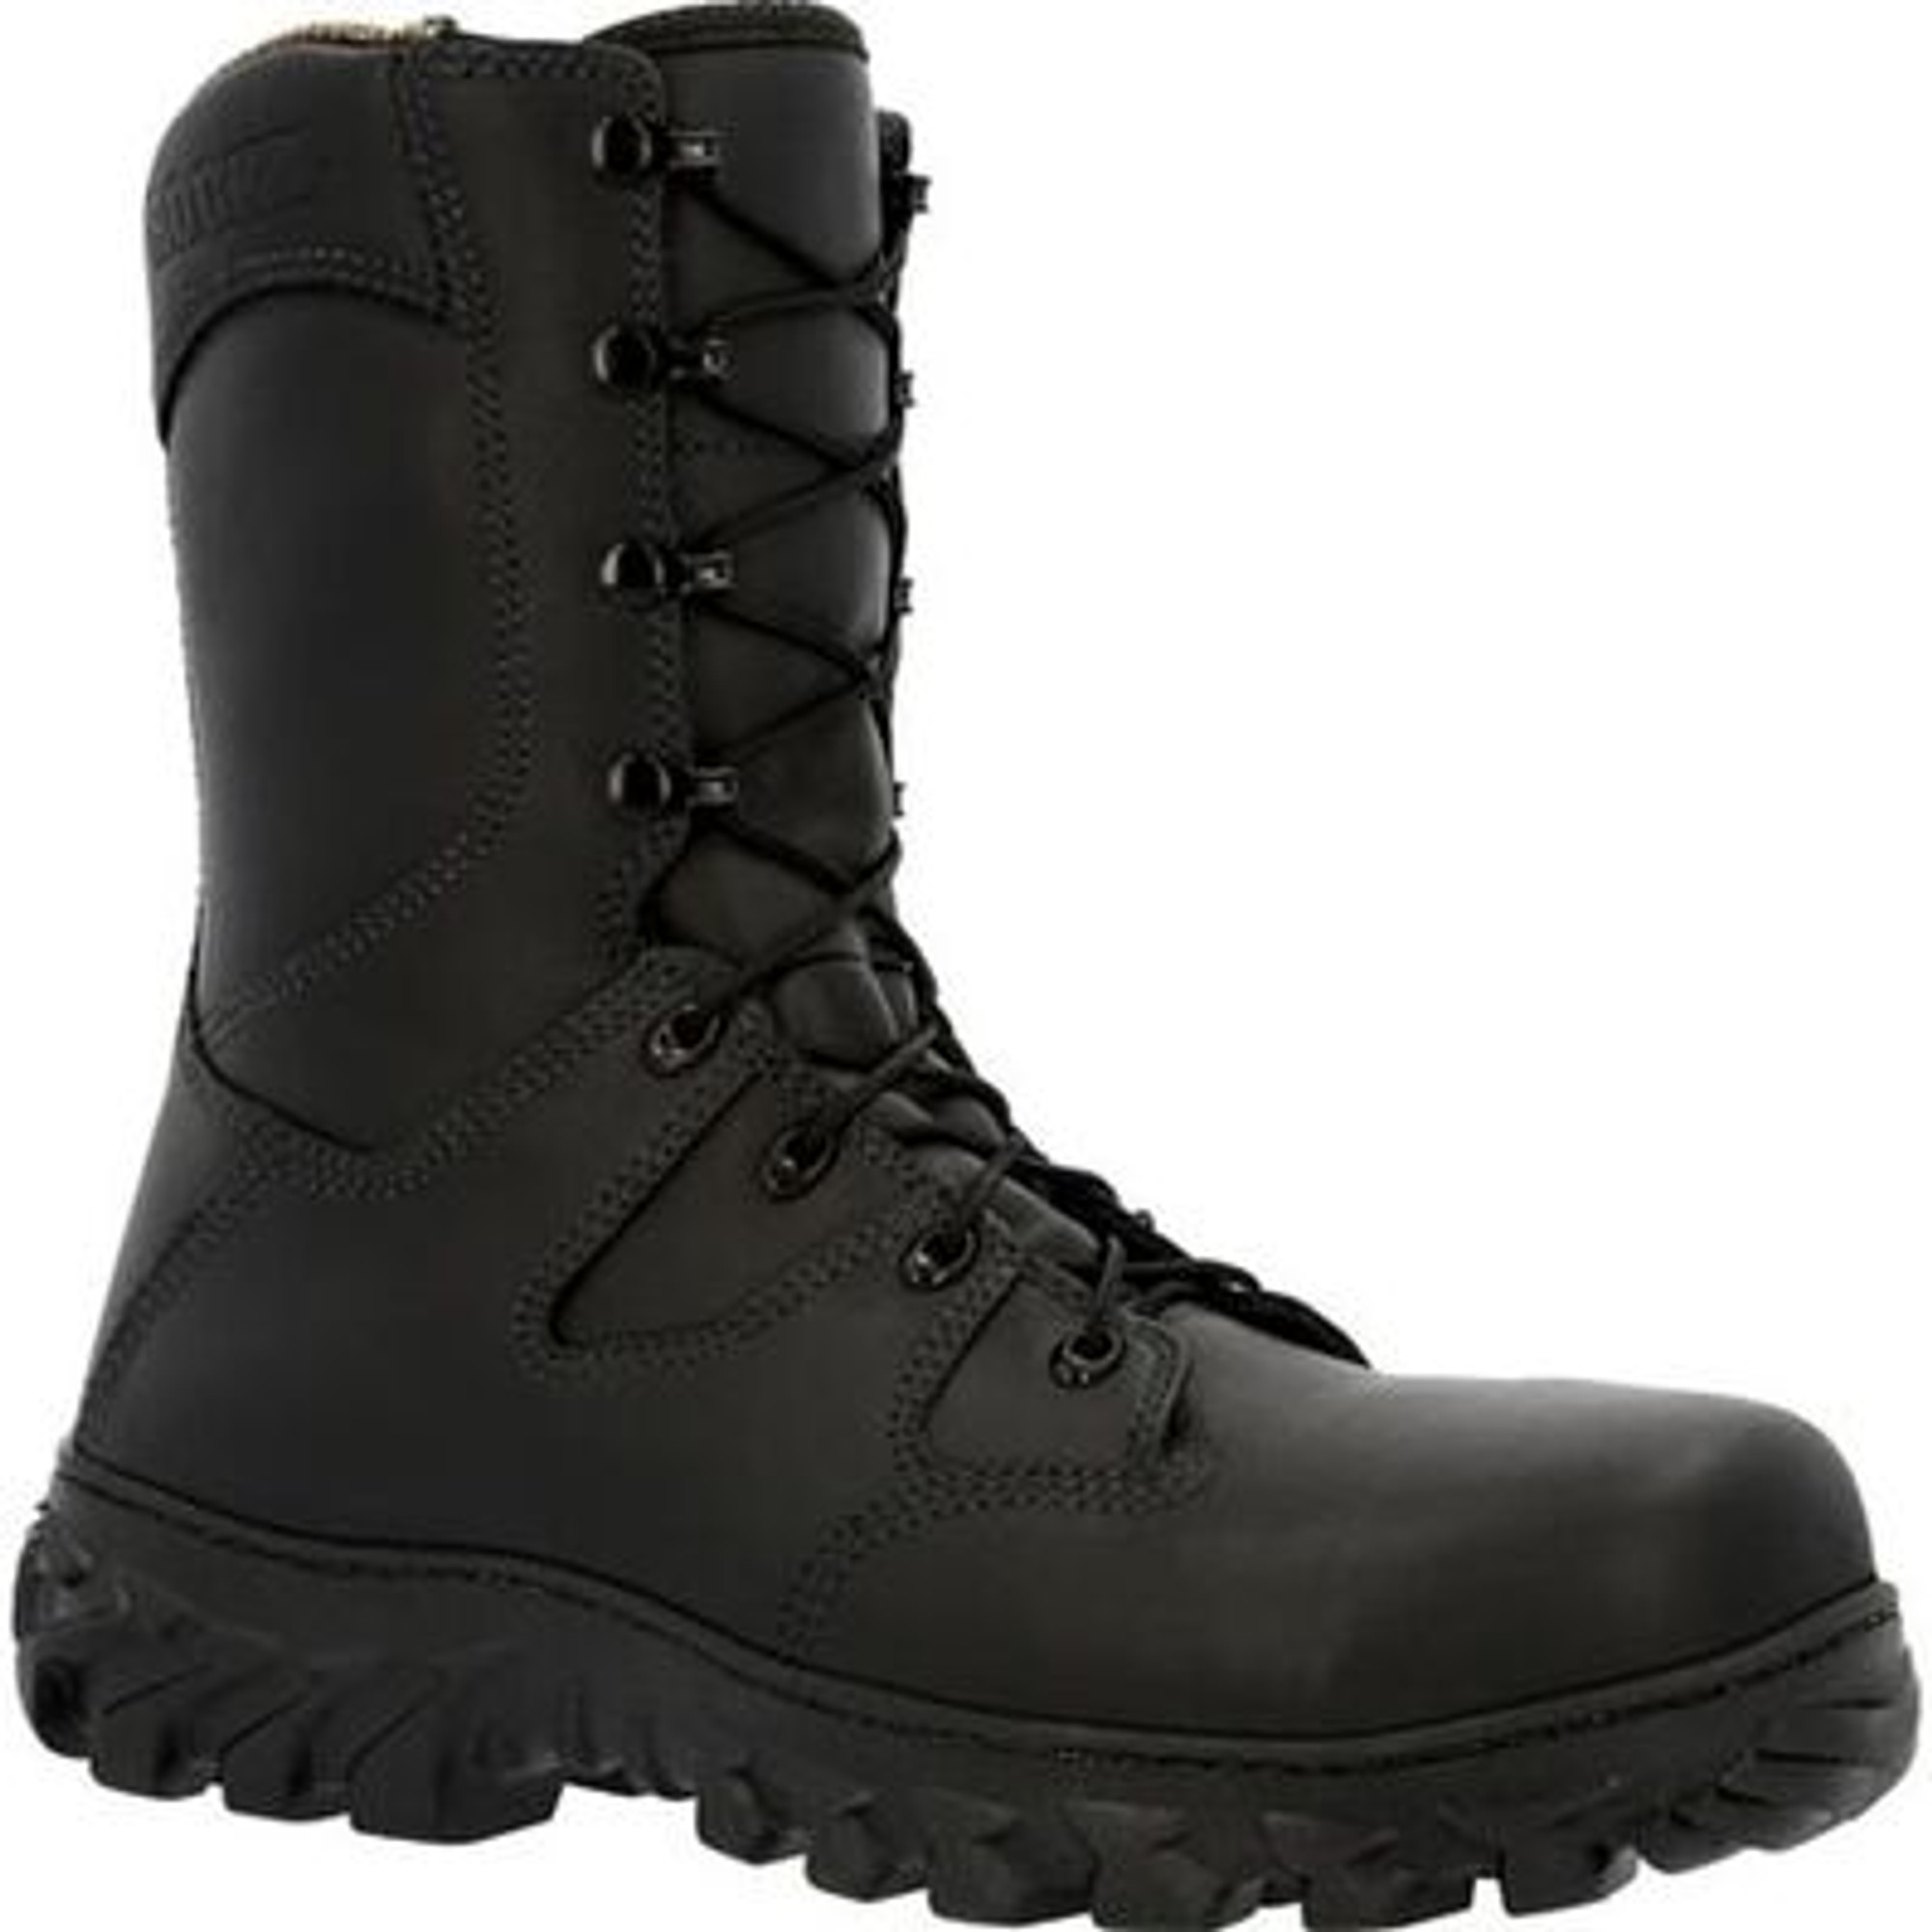 Rocky Women's Code Red Rescue Nfpa Rated Composite Toe Fire Boot - Black